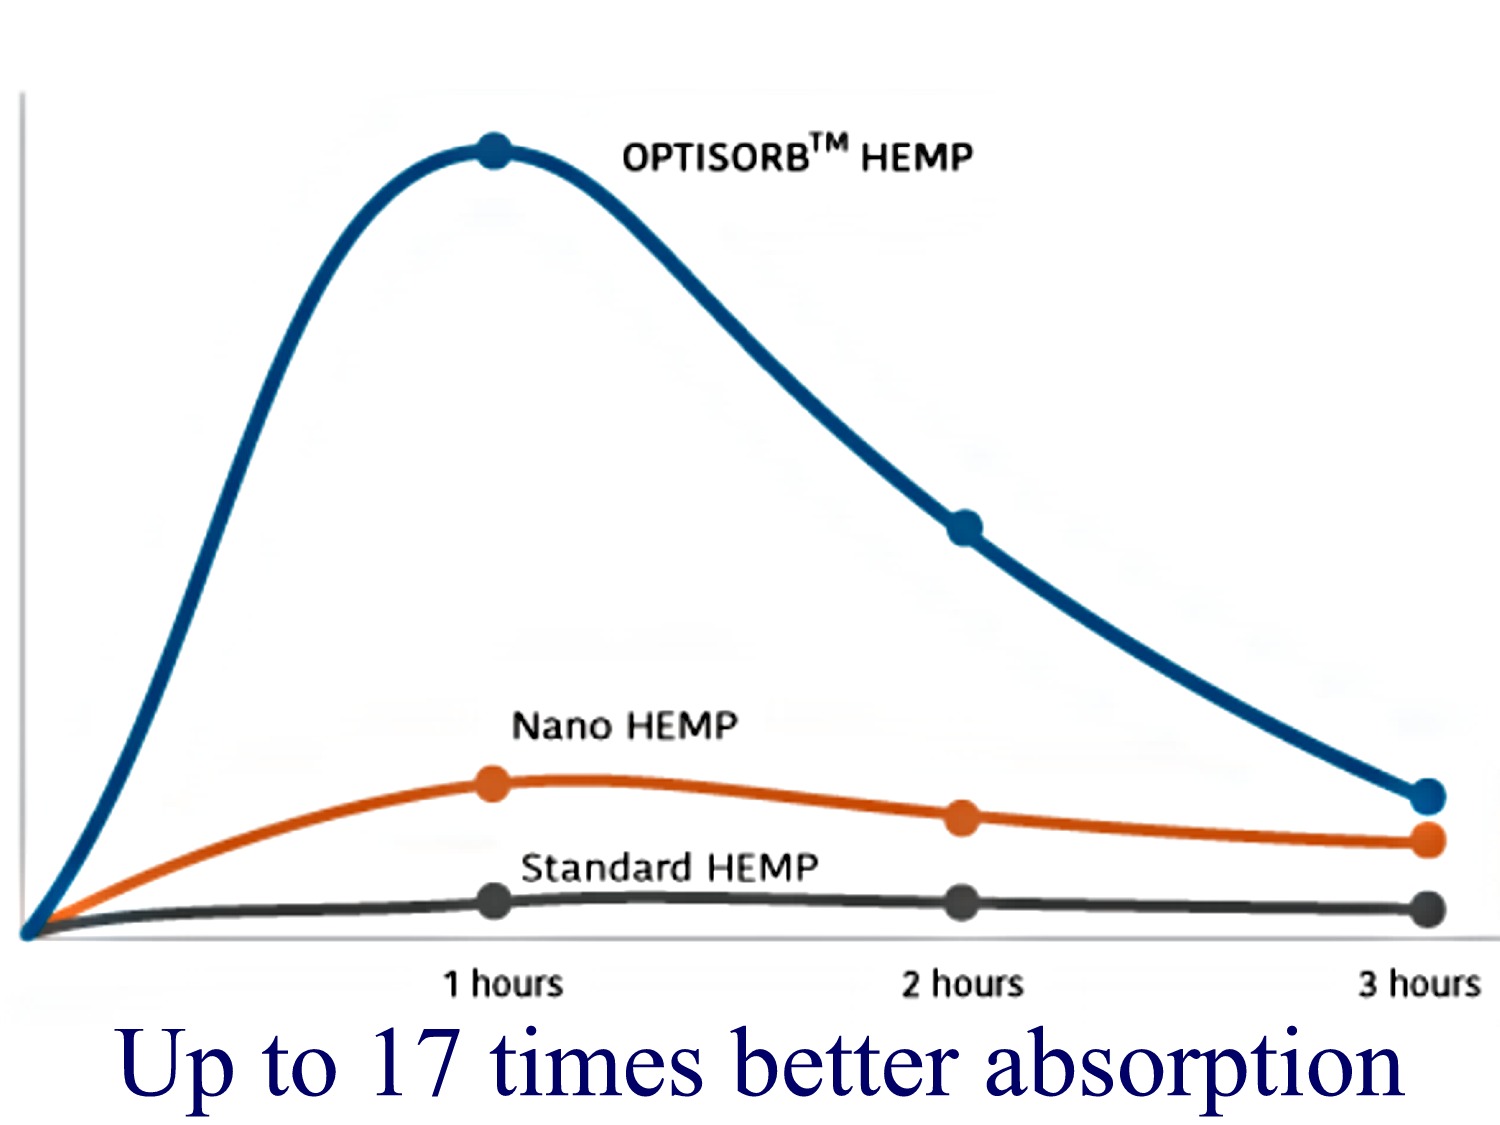 Absorption Rates of Typical CBD Oil